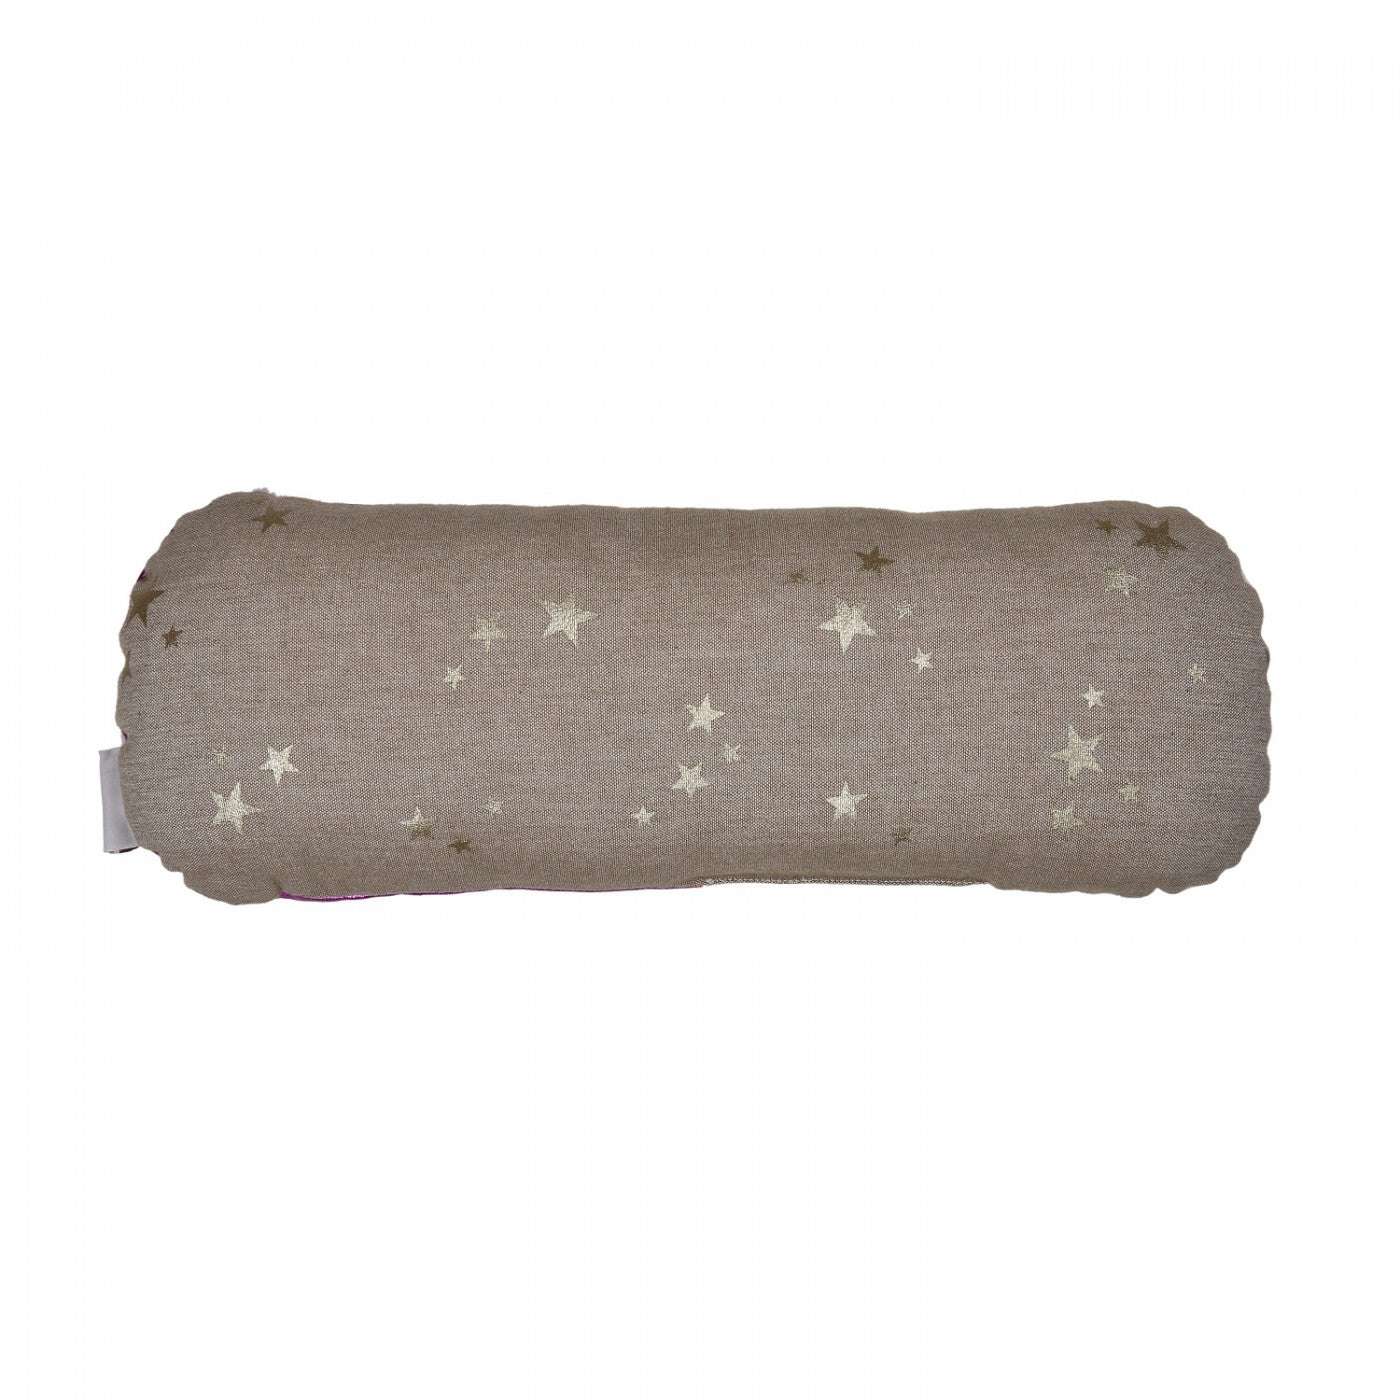 Shaped Cushion Chill Pillow Bolster 7x17 Inch